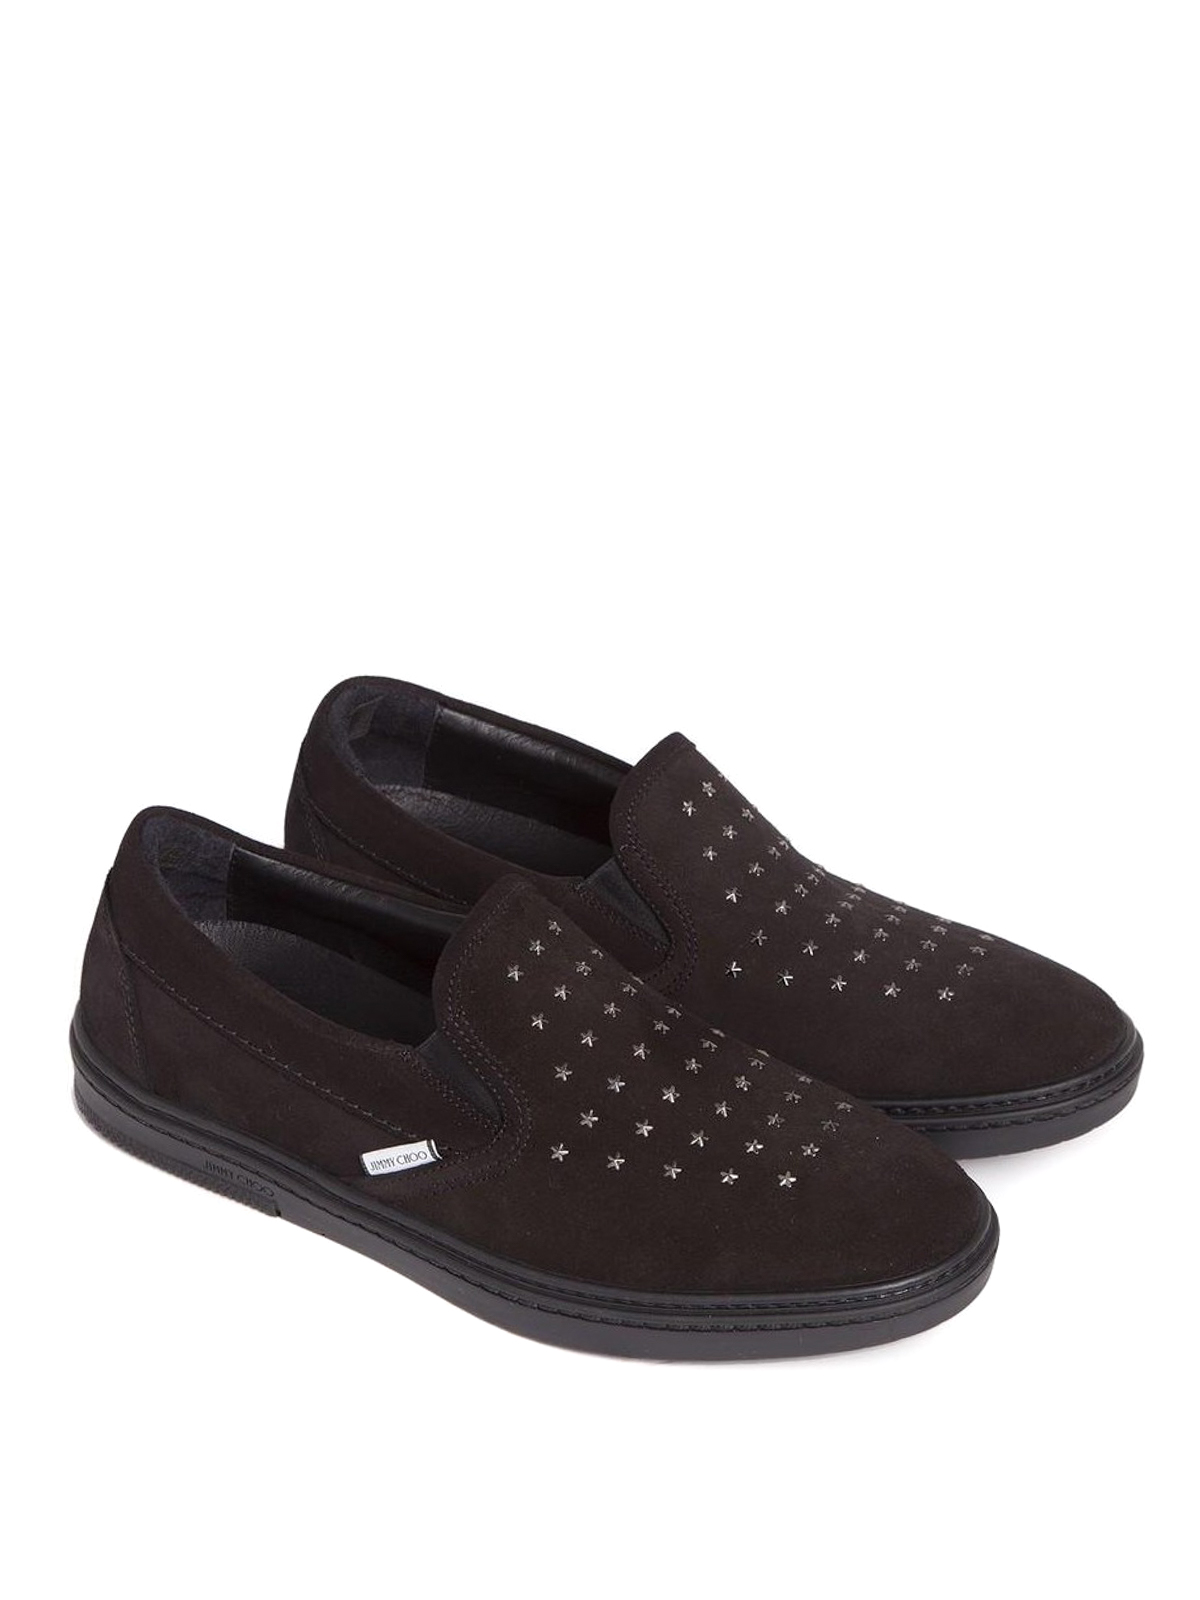 Jimmy Choo - Grove suede slip-ons with 